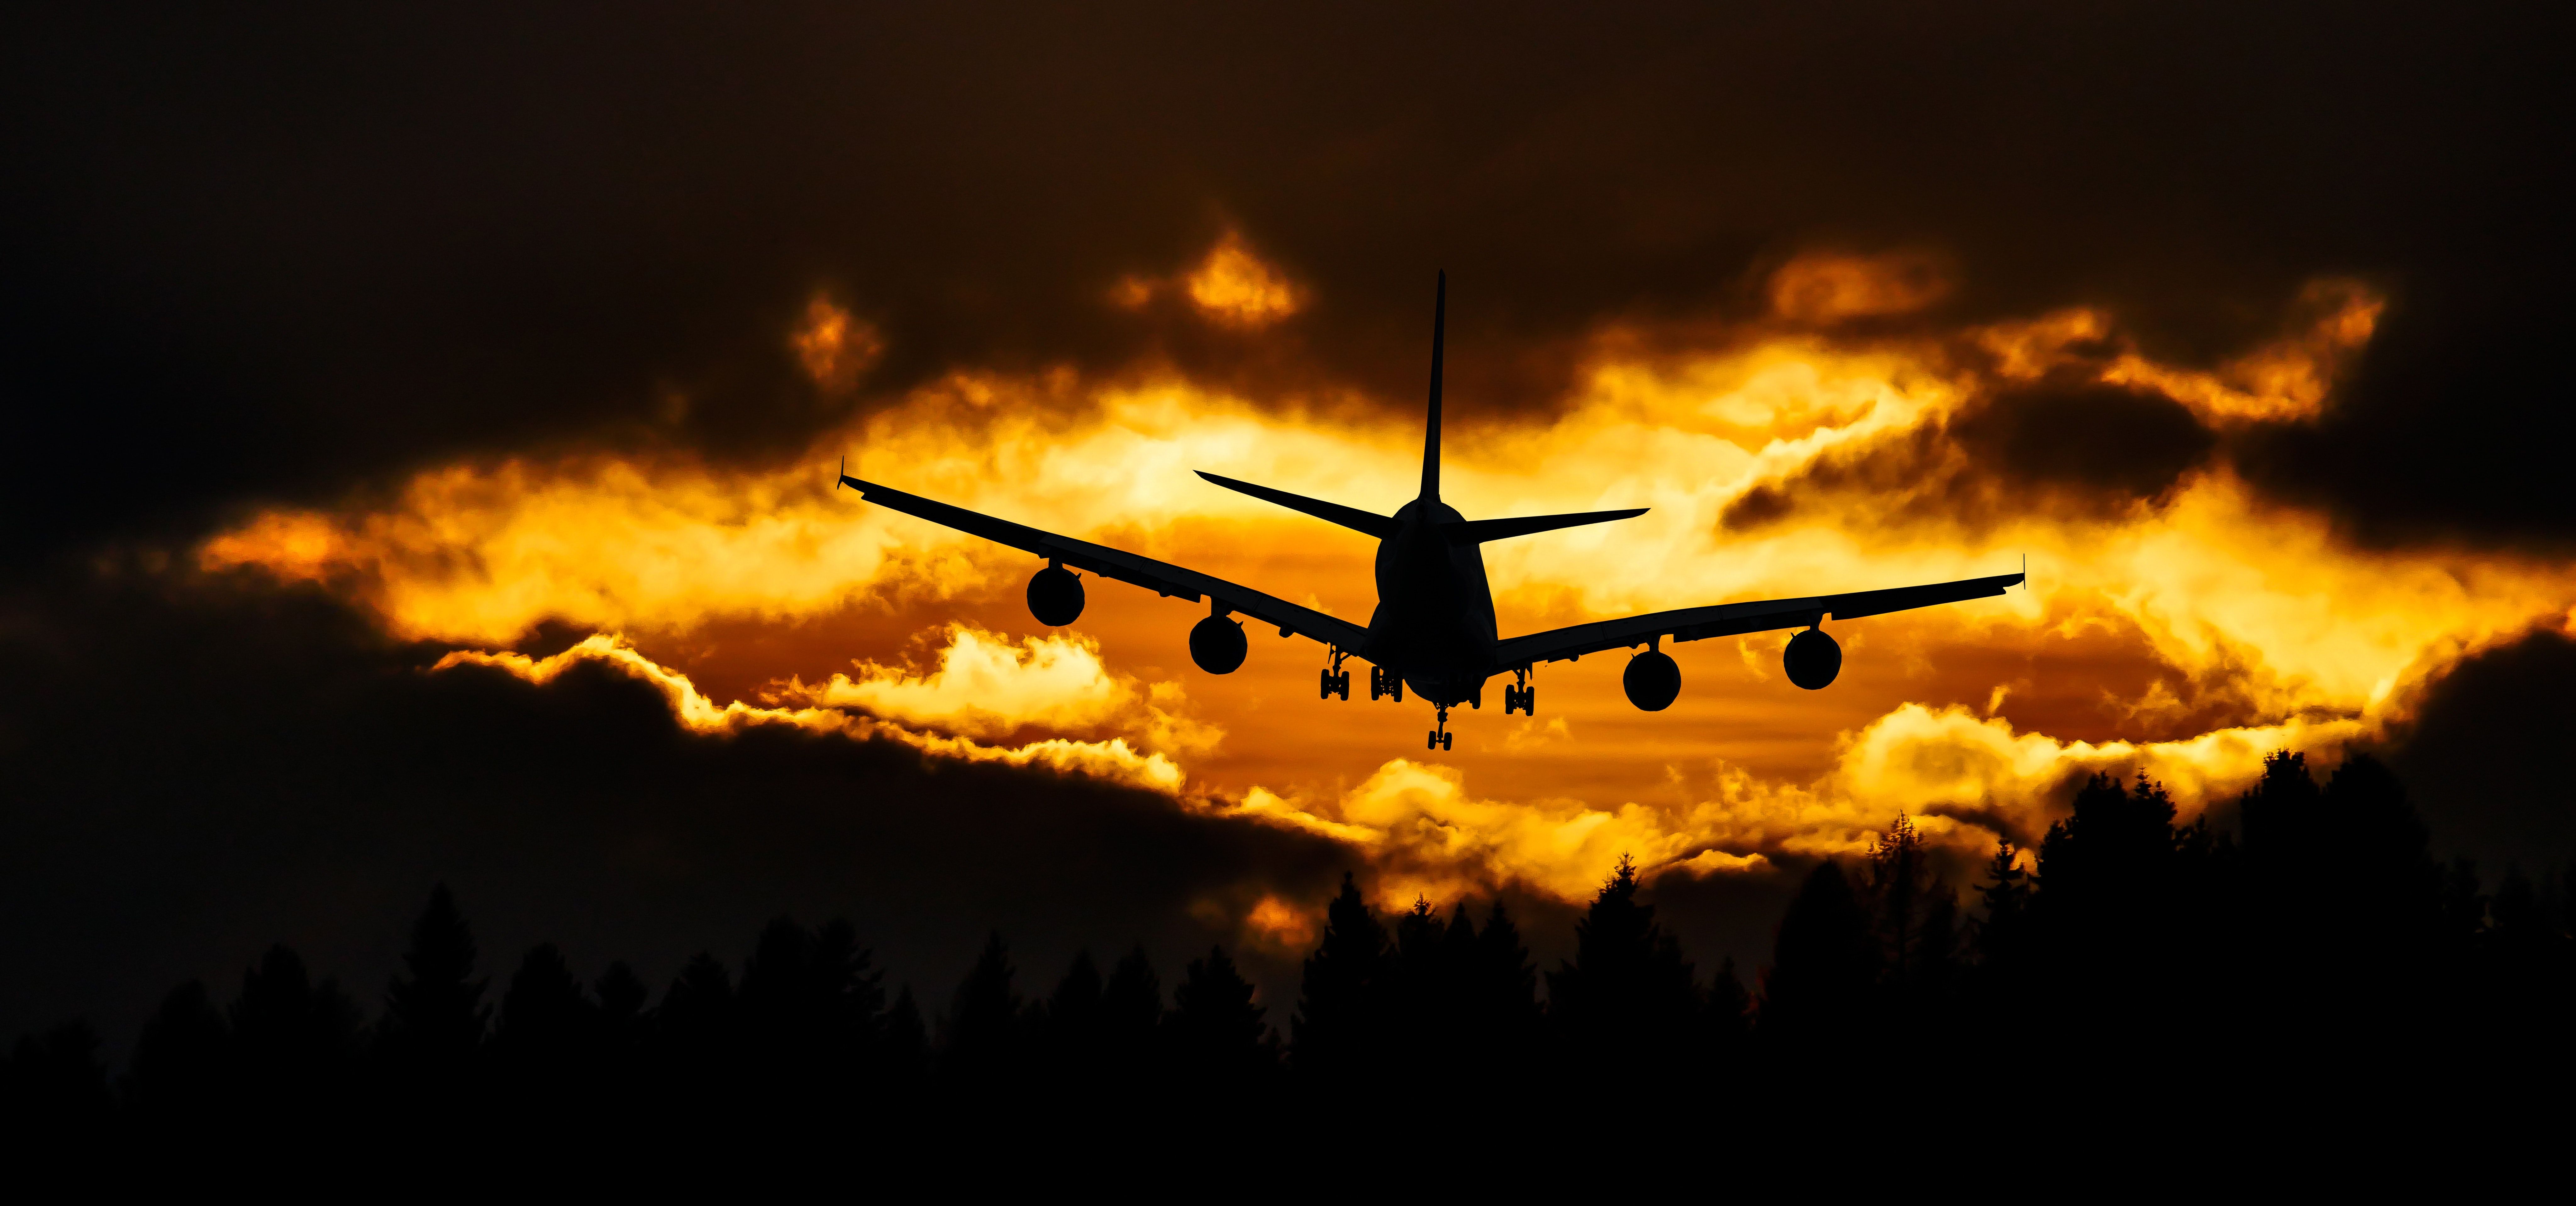 Airplane Silhouette on Air during Sunset · Free